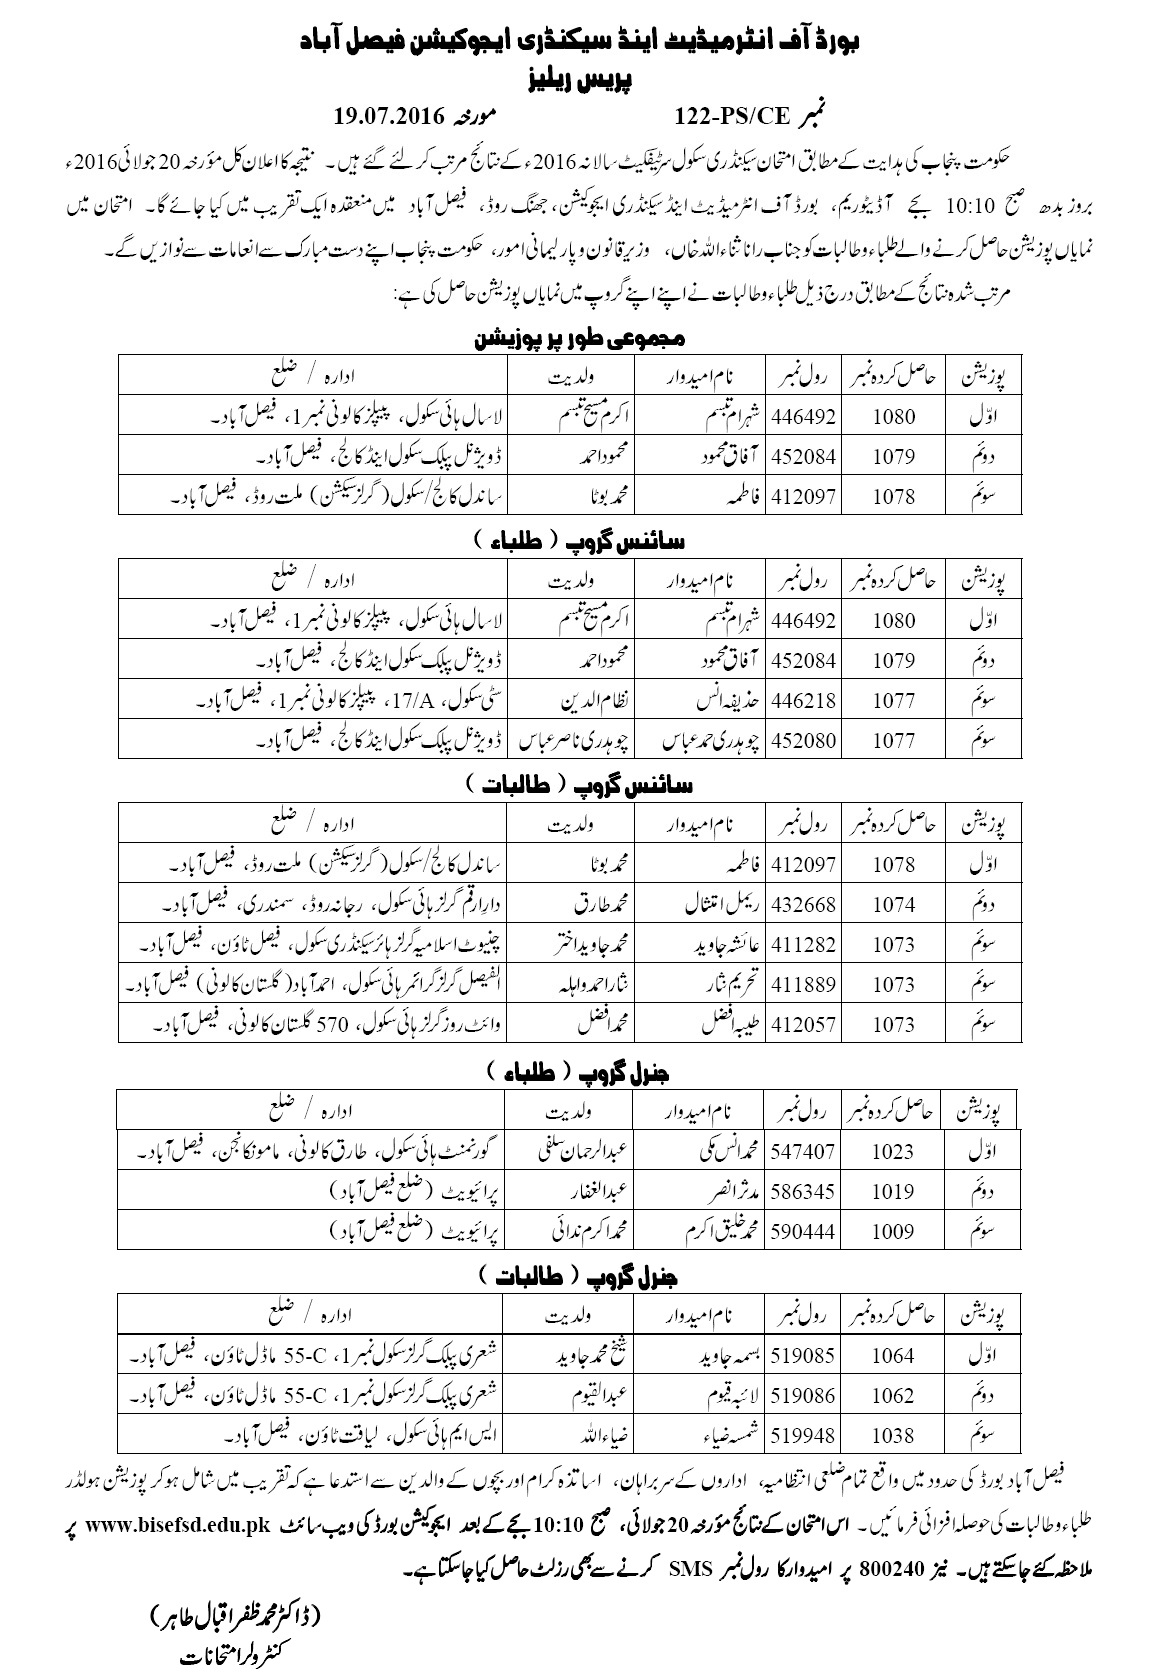 Faislaabad BISE SSC annual matriculation examinations 2016 top position holders